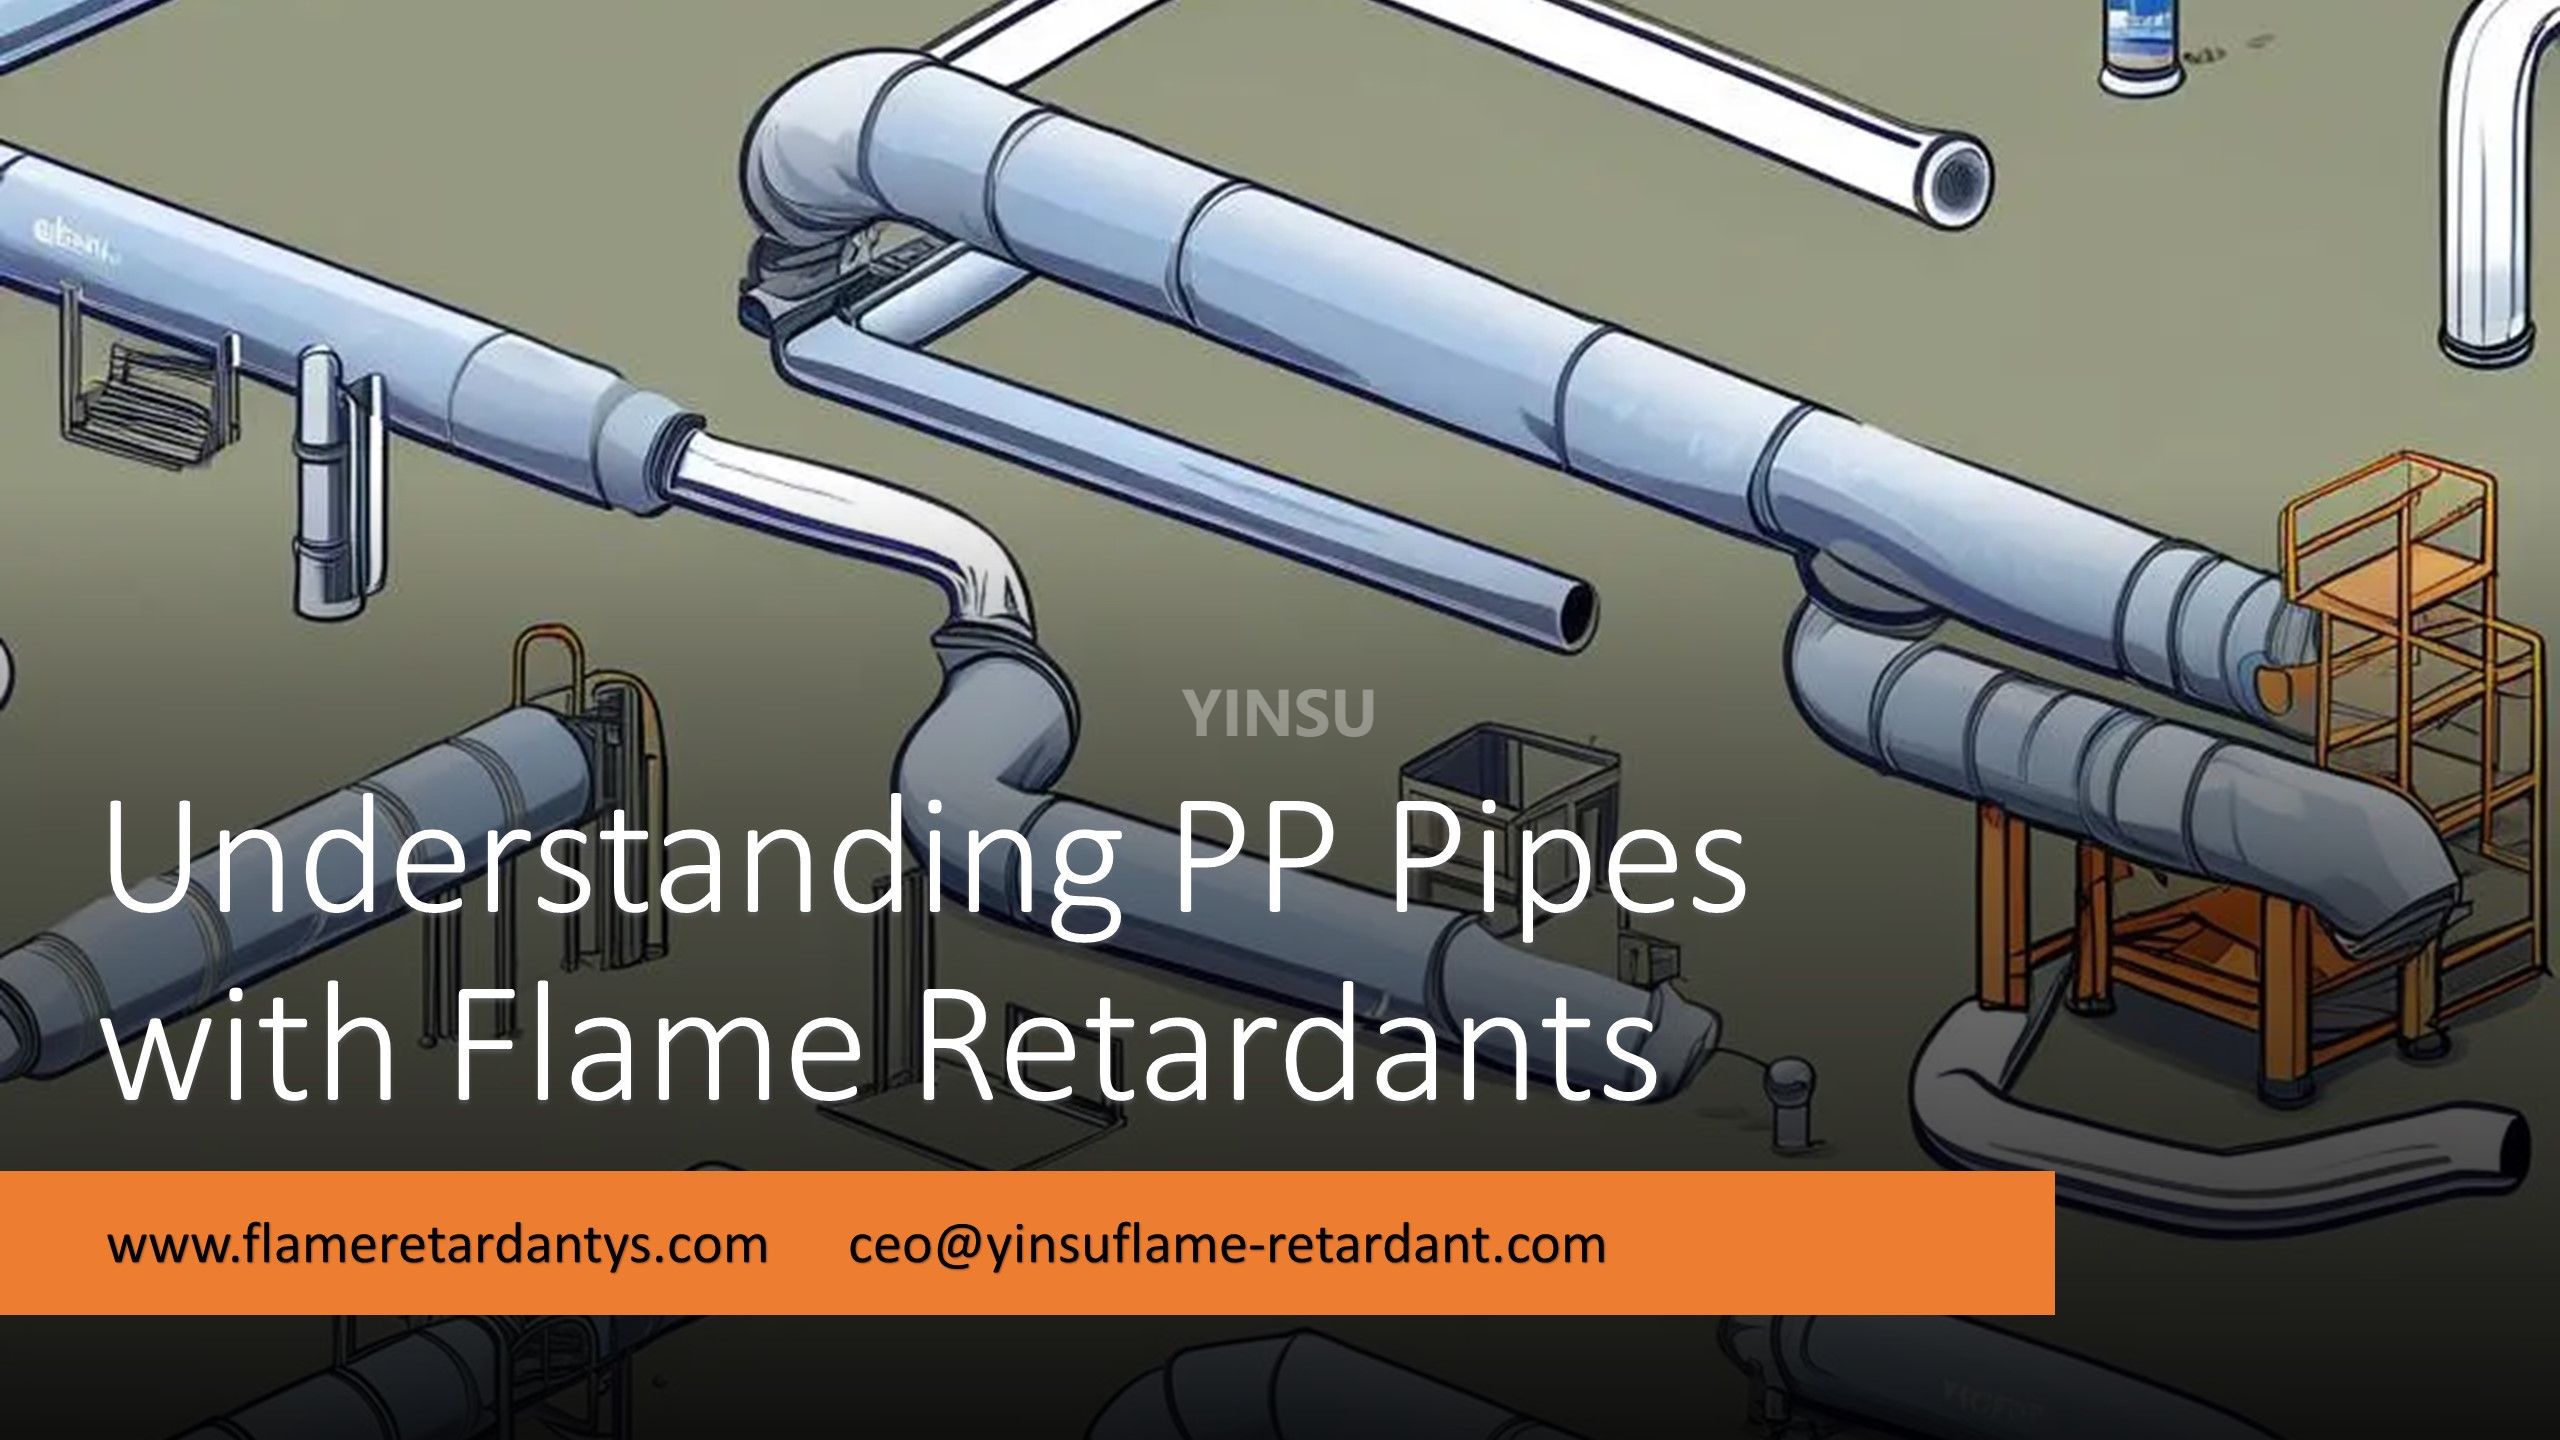 Understanding PP Pipes with Flame Retardants